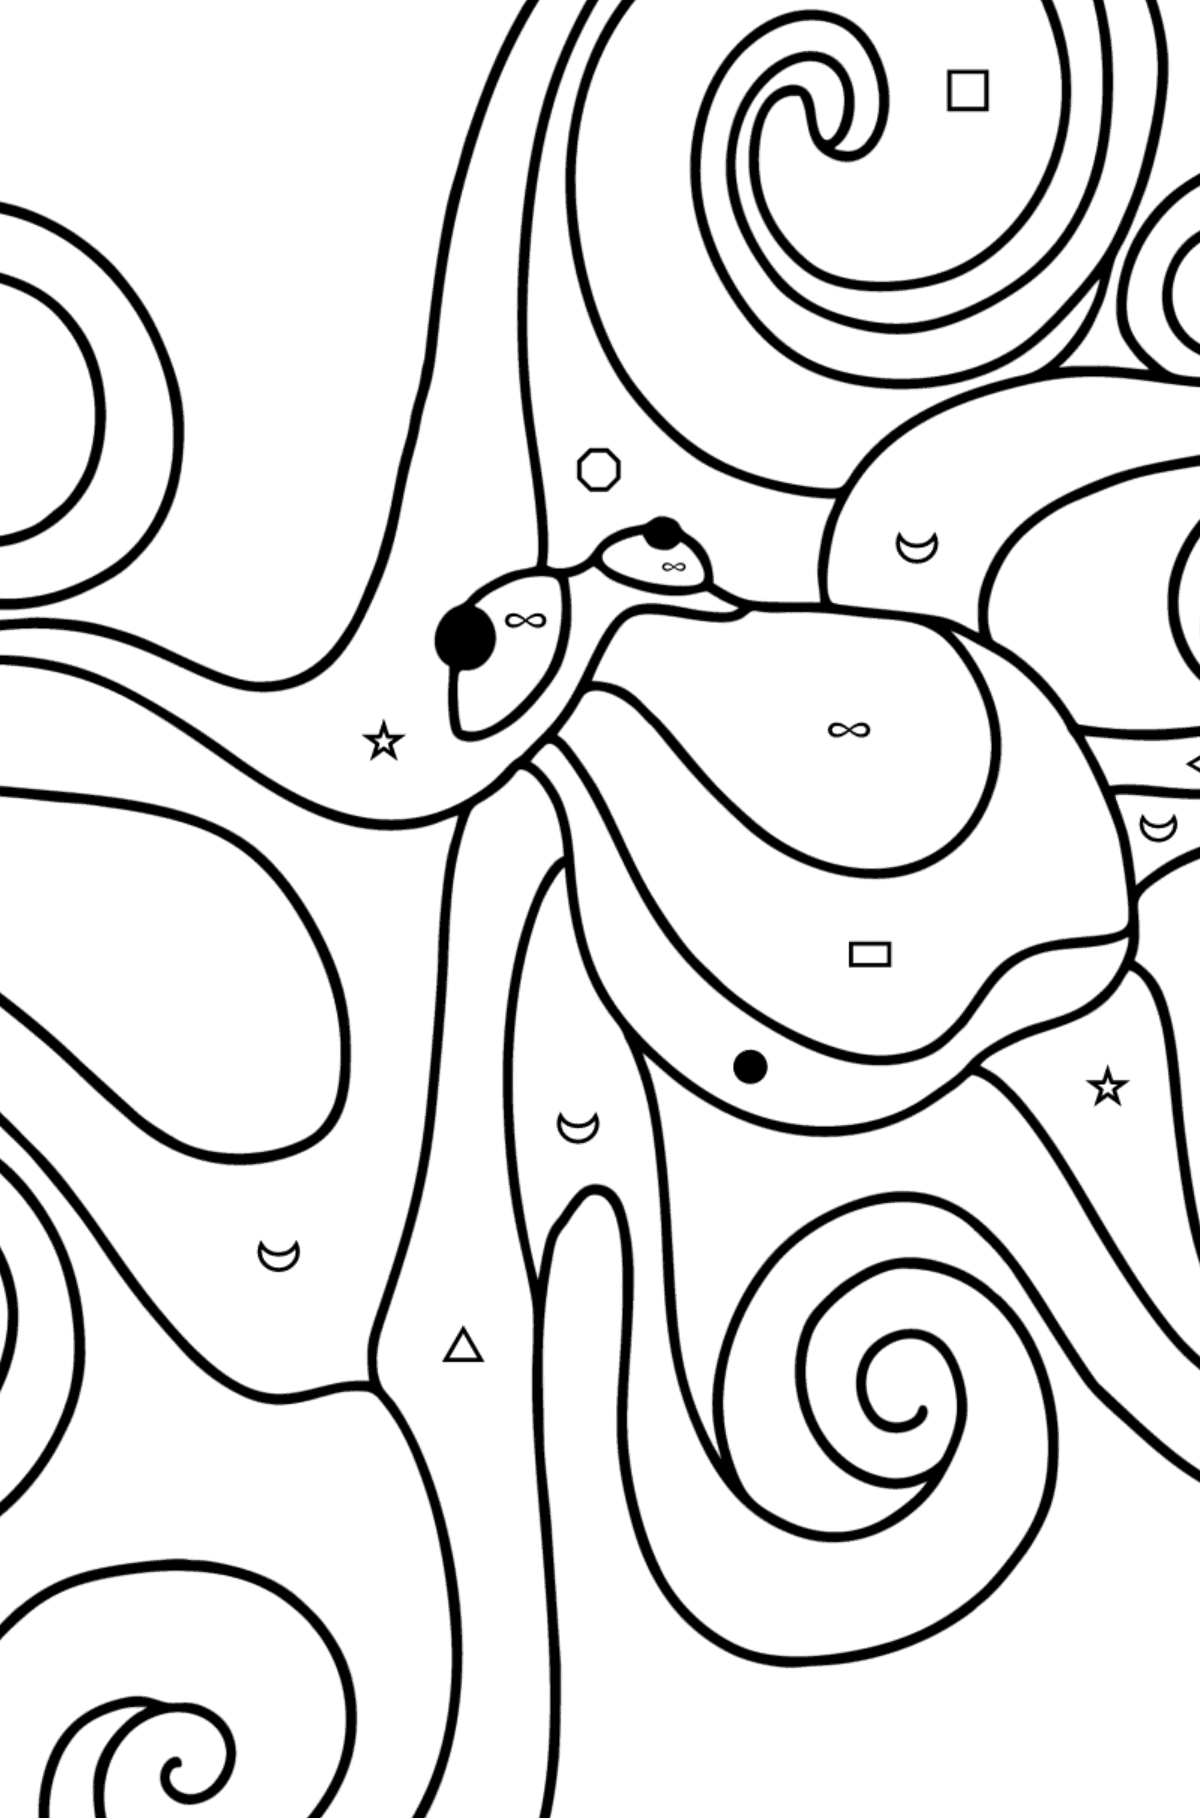 Common octopus coloring page - Coloring by Symbols and Geometric Shapes for Kids